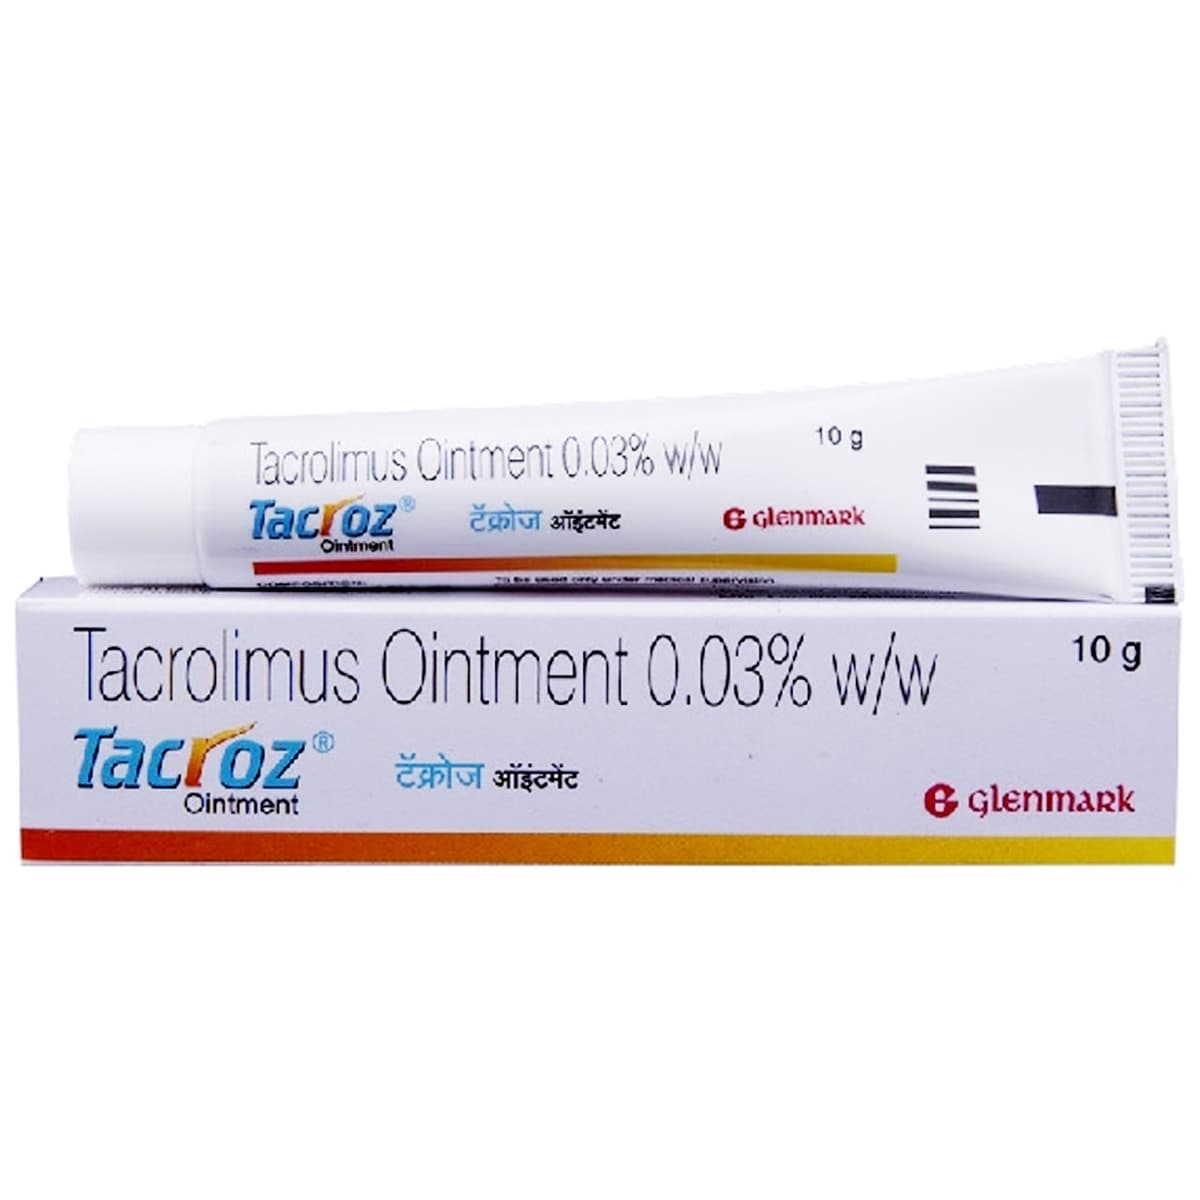 Buy Tacroz Ointment 10 gm Online